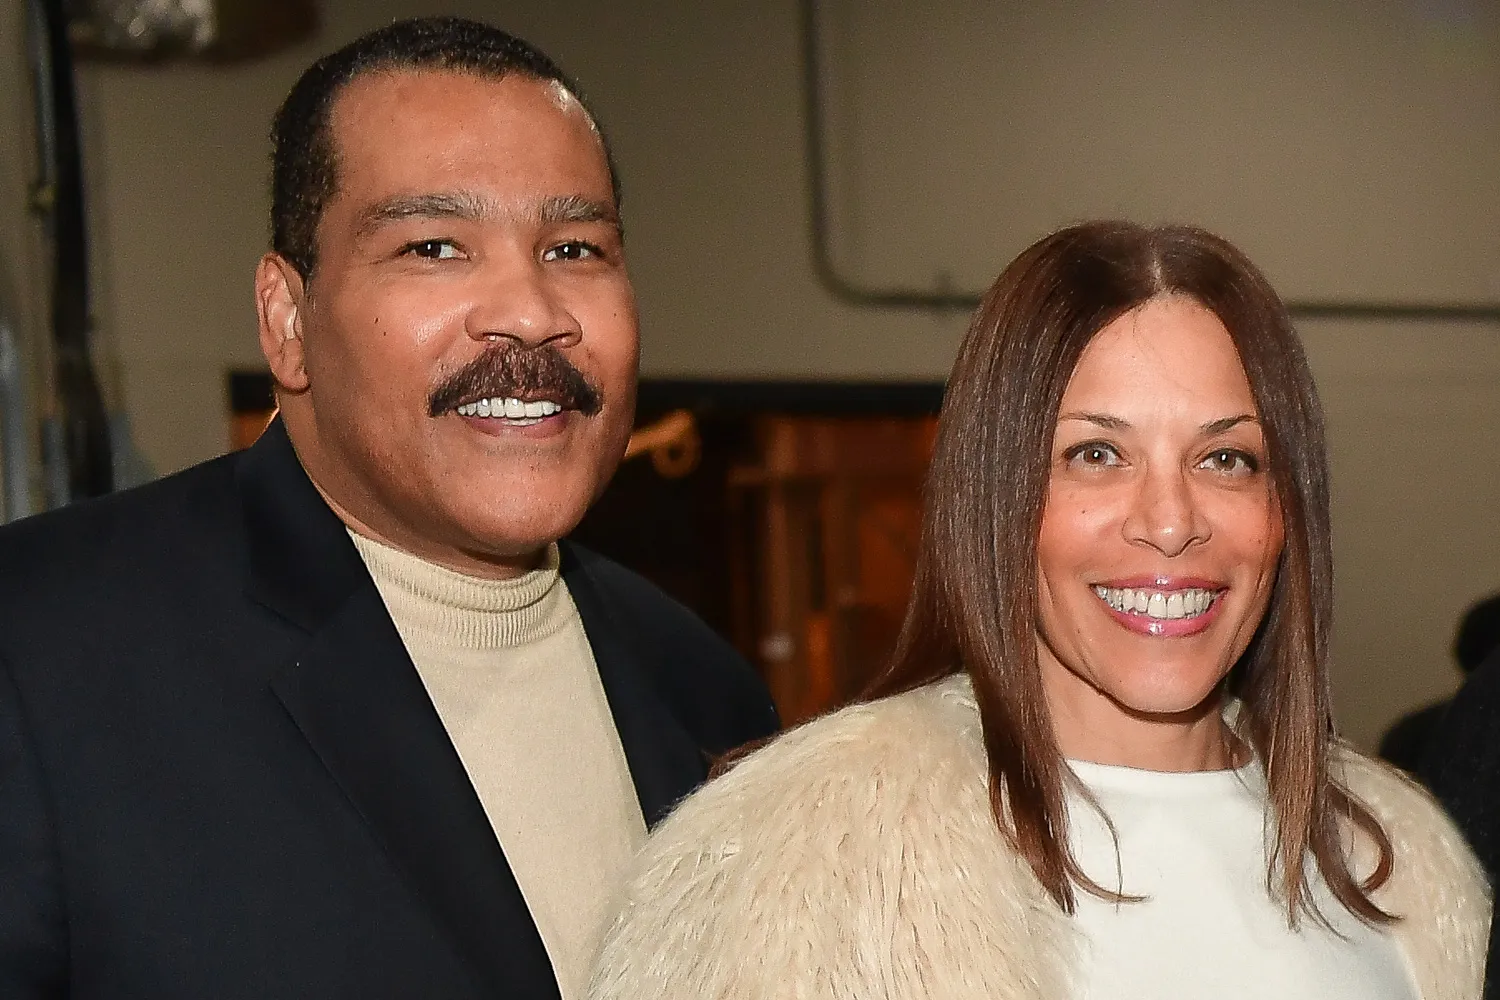 Dexter Scott King with wife, Leah King (Credits: The US Sun)